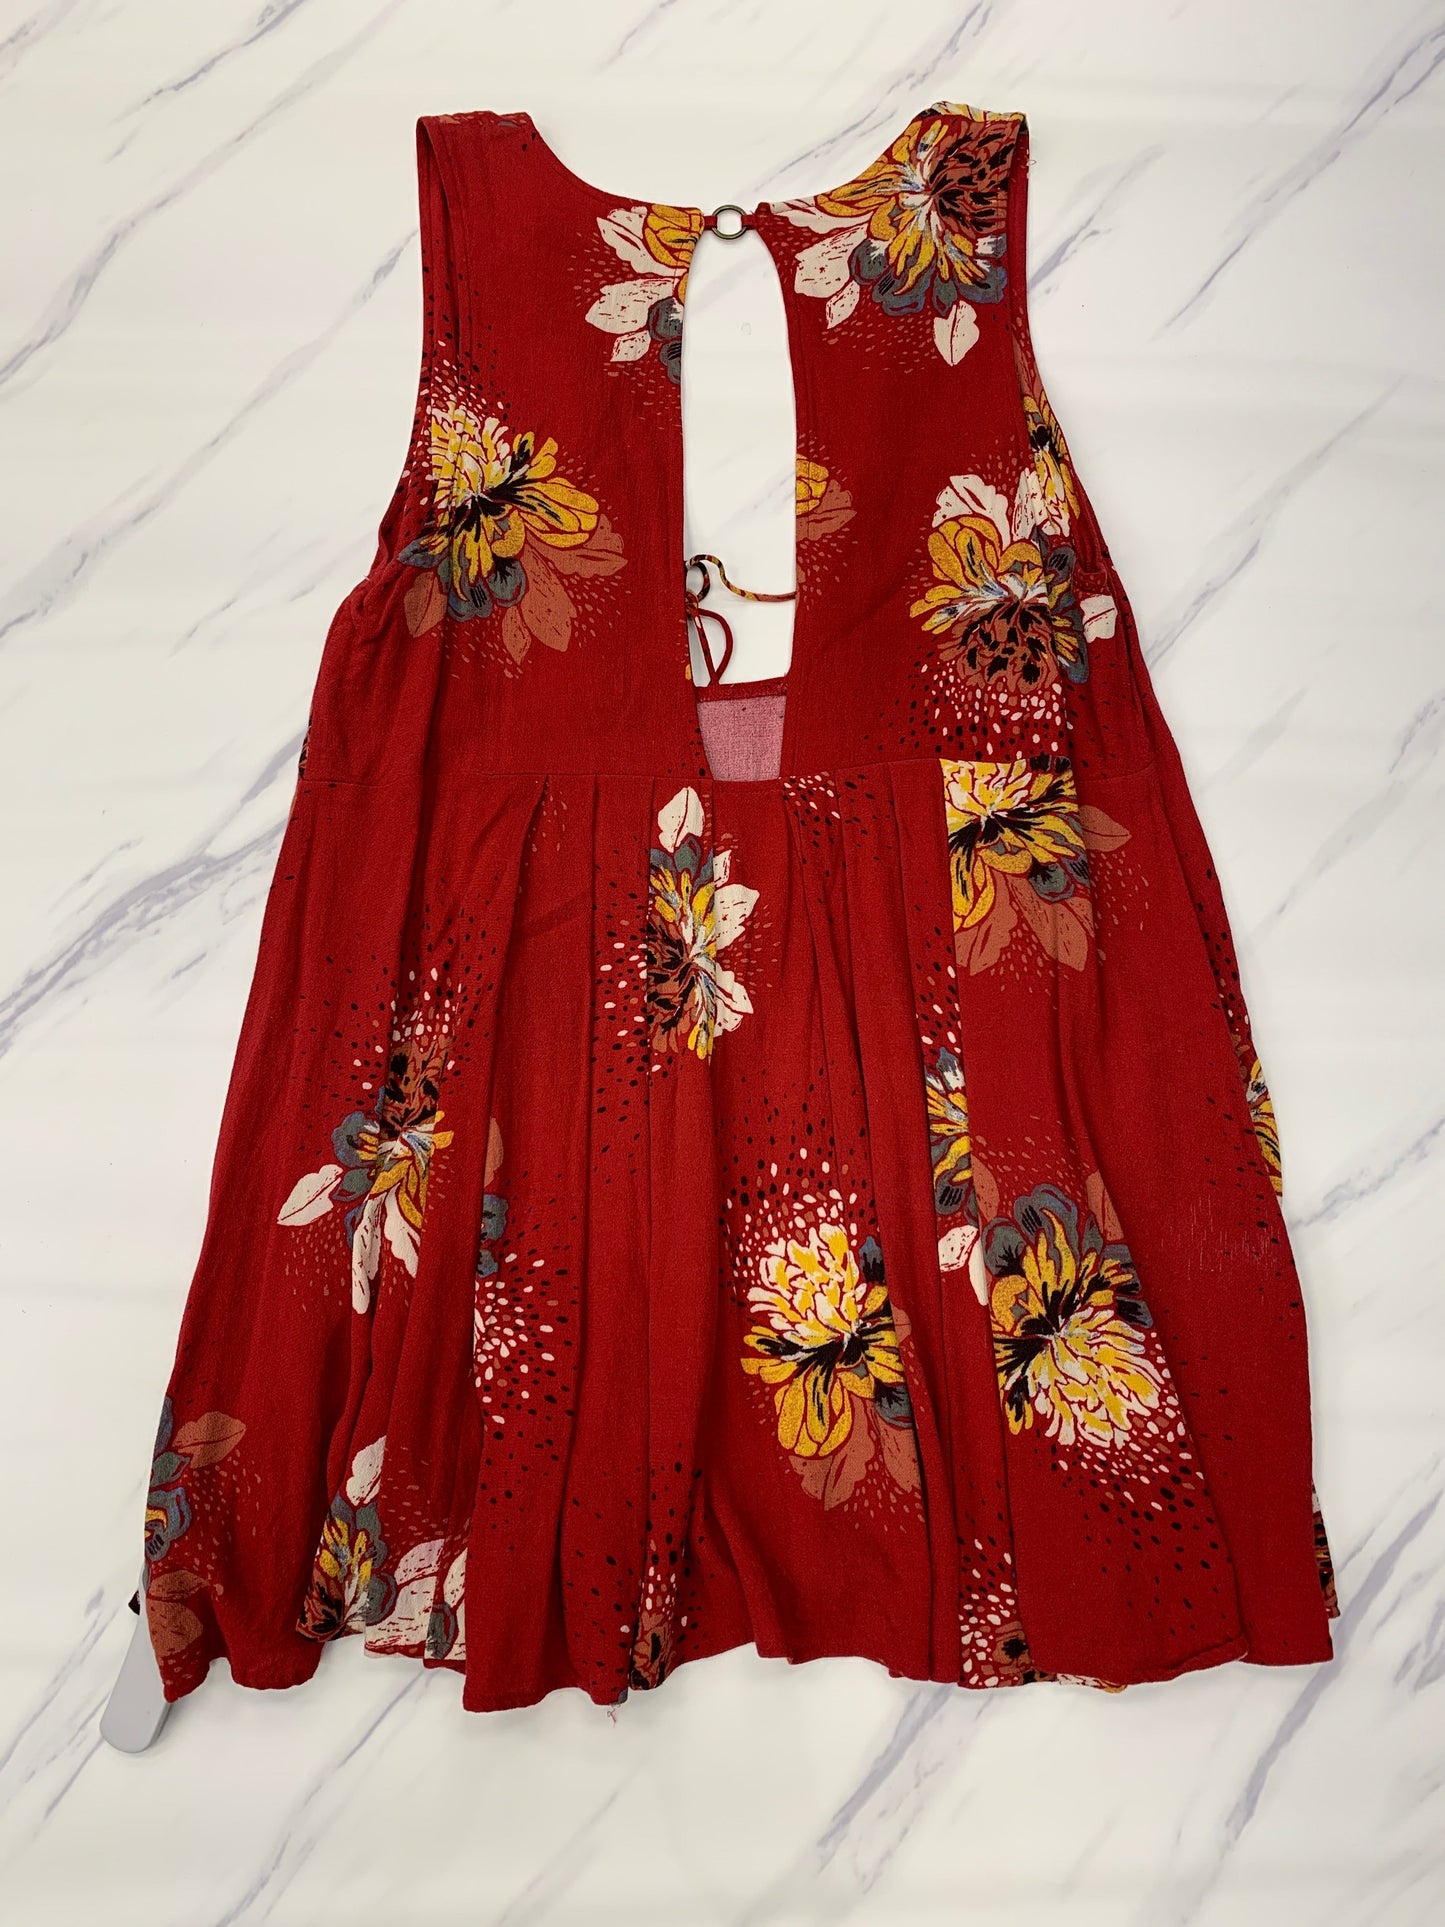 Red Top Sleeveless Free People, Size S